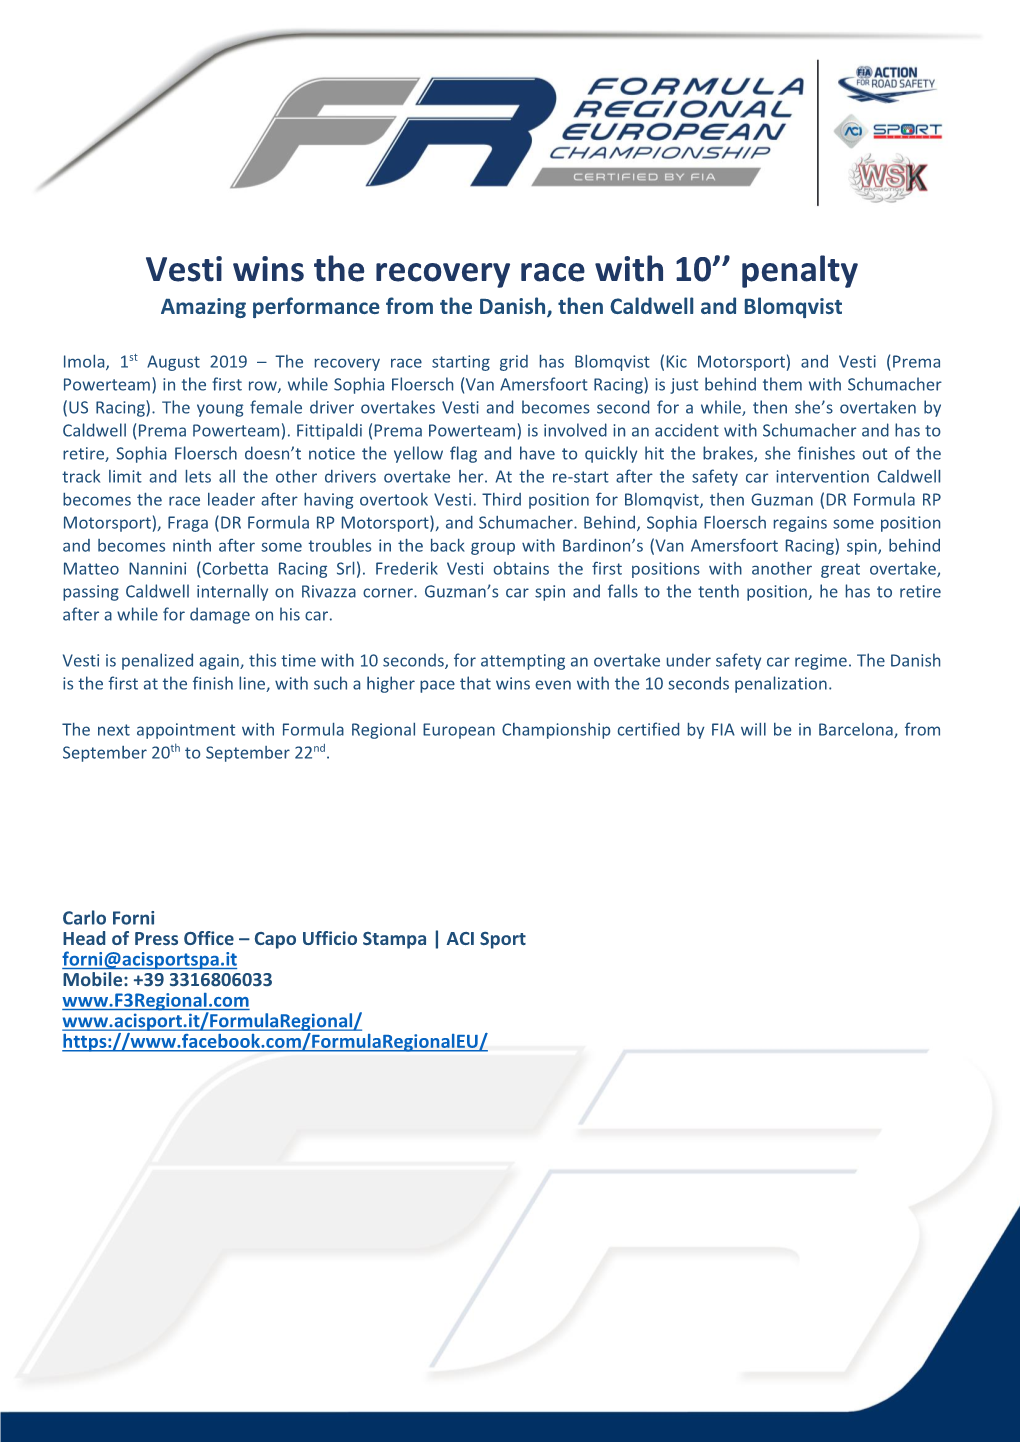 Vesti Wins the Recovery Race with 10'' Penalty